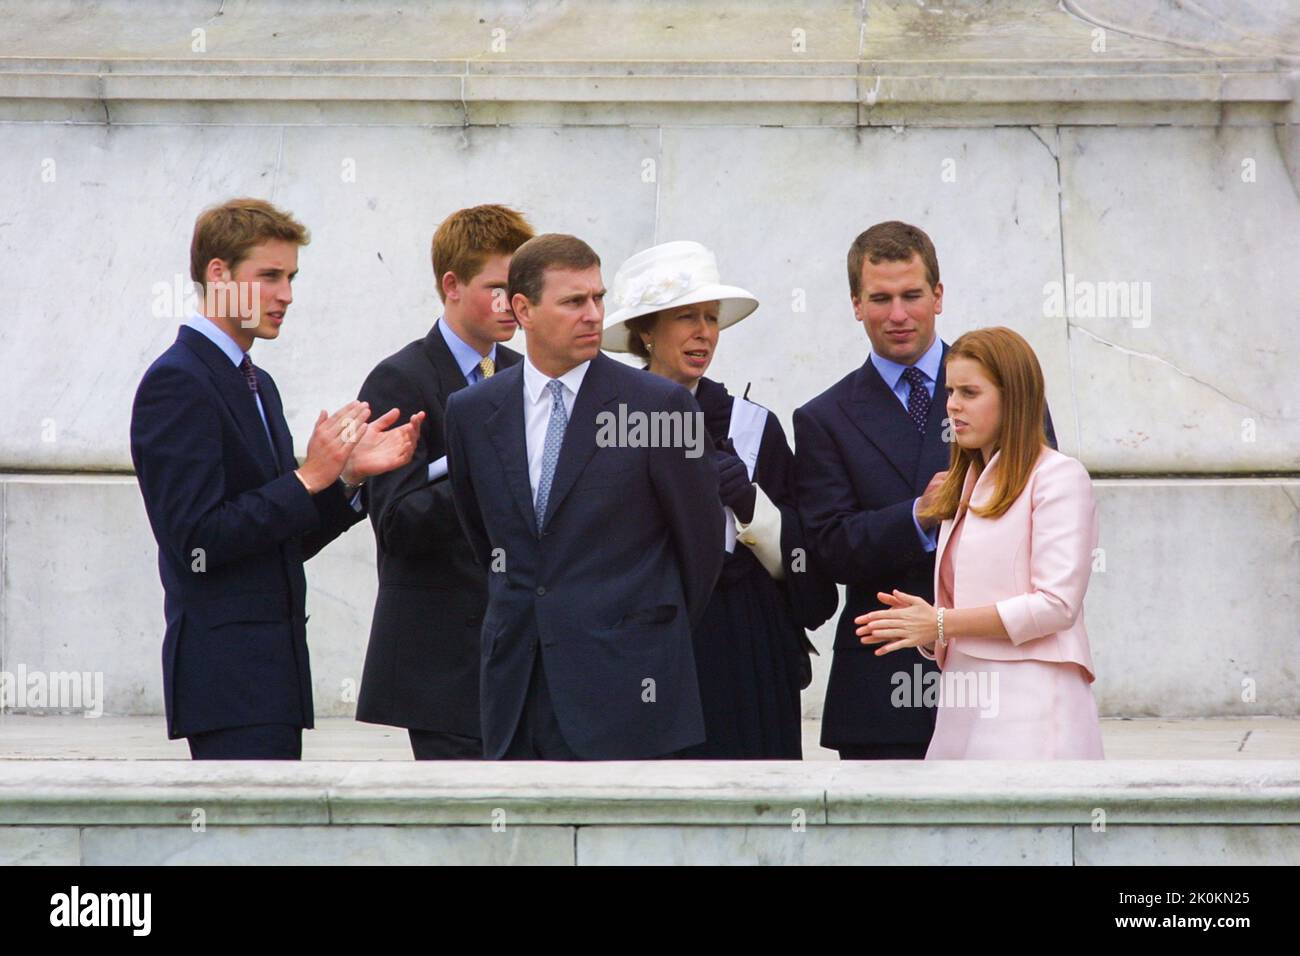 4th June 2002 - Members of British Royal Family attending Golden Jubilee of Queen Elizabeth II at Buckingham Palace in London Stock Photo